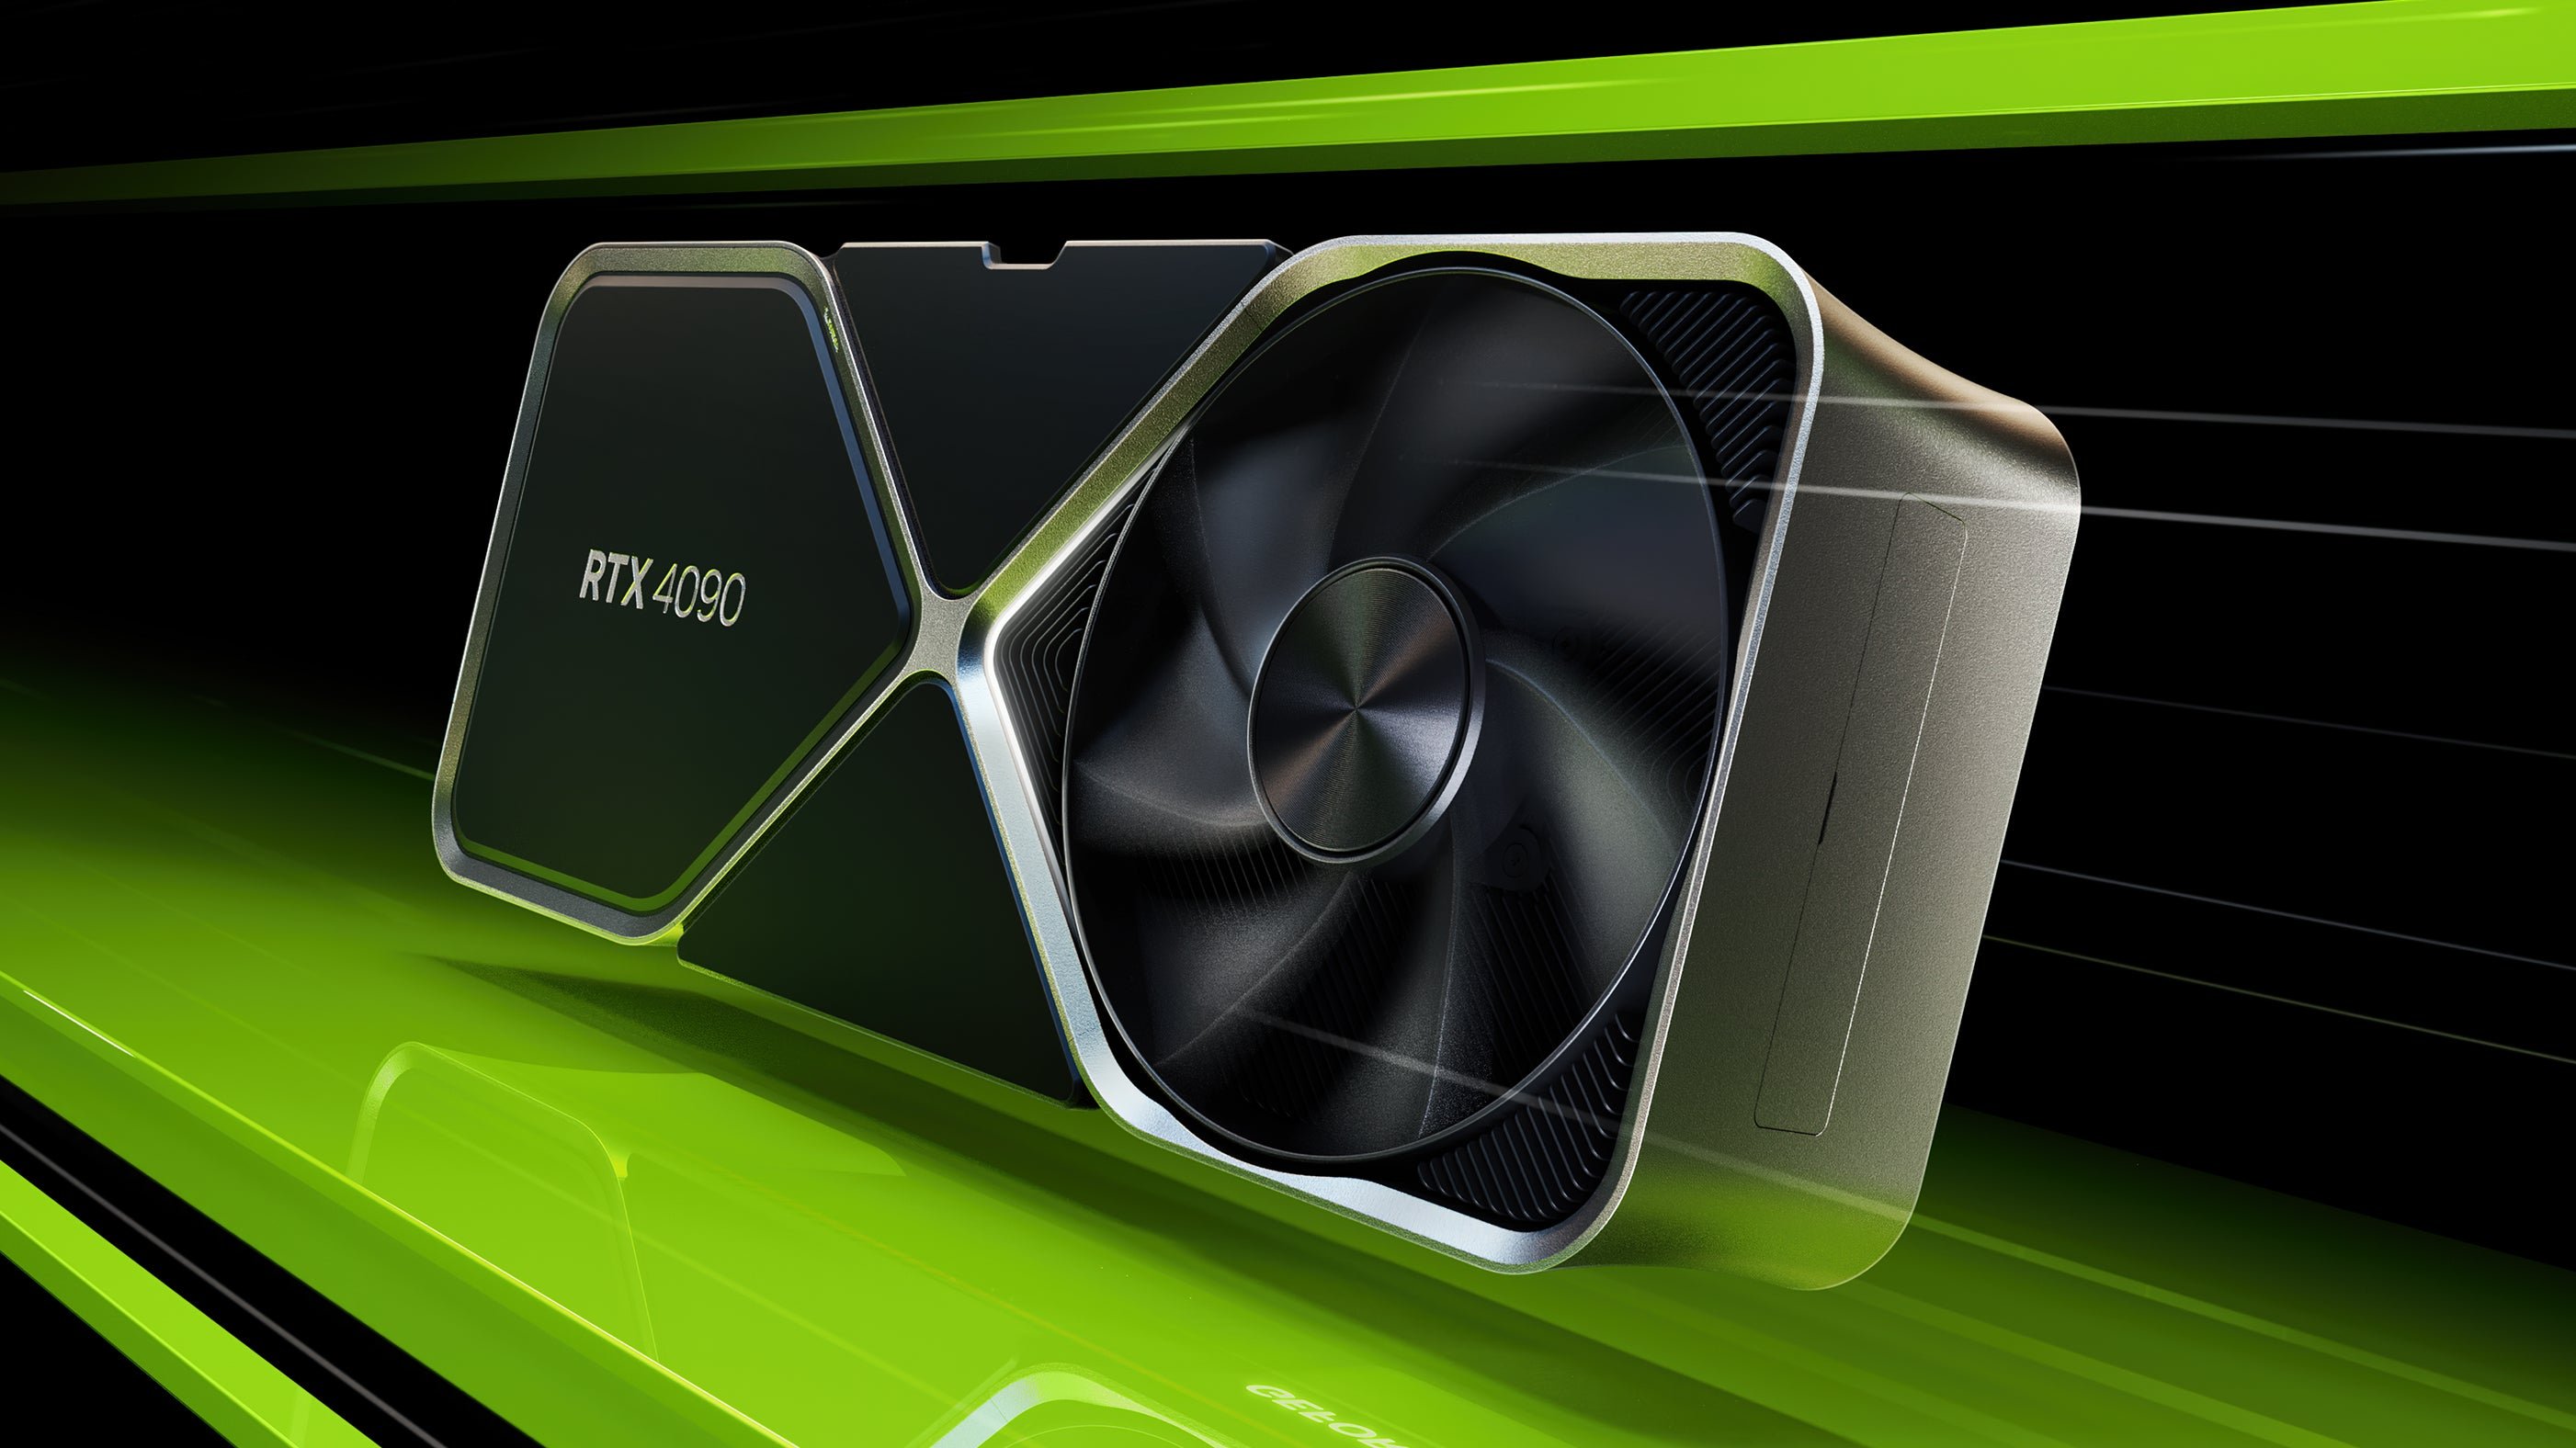 NVIDIA investigates reports of cable burn or melt with GeForce RTX 4090 – Nvidia